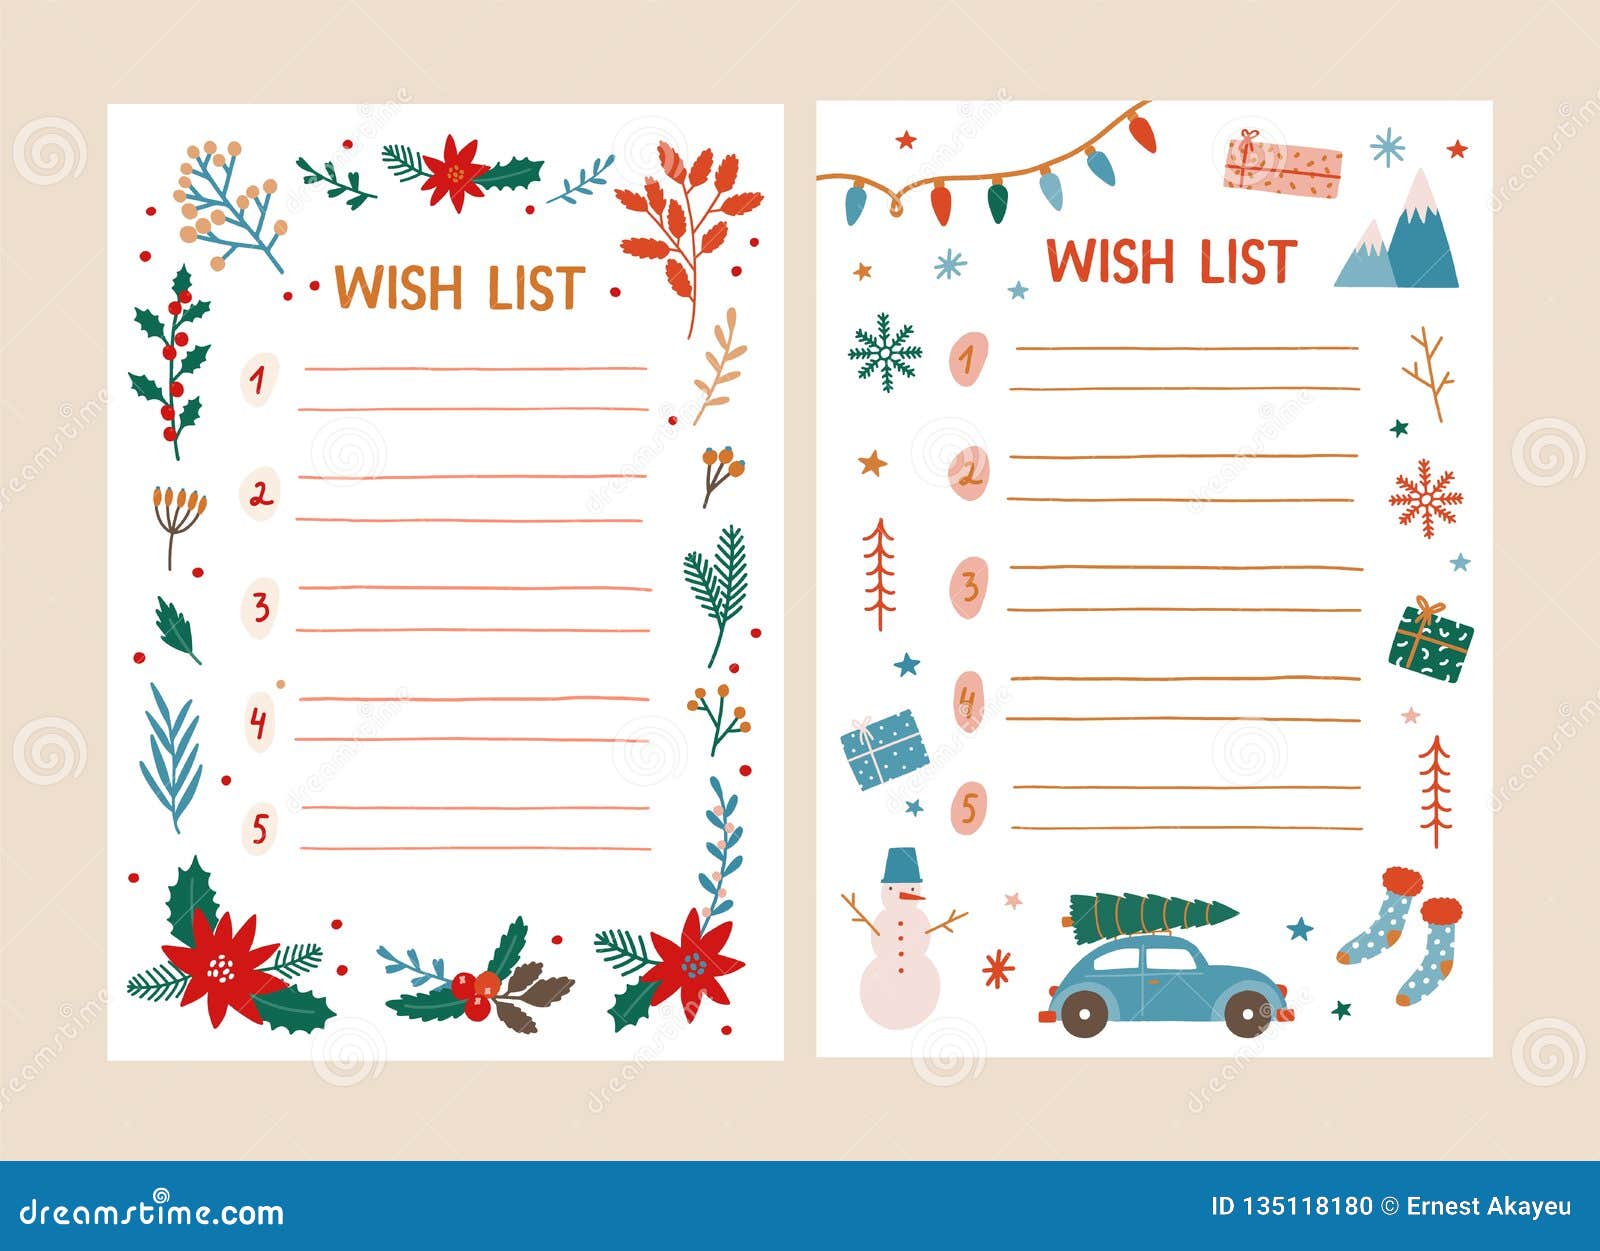 Bundle of Wish List Templates Decorated by Traditional Seasonal ...